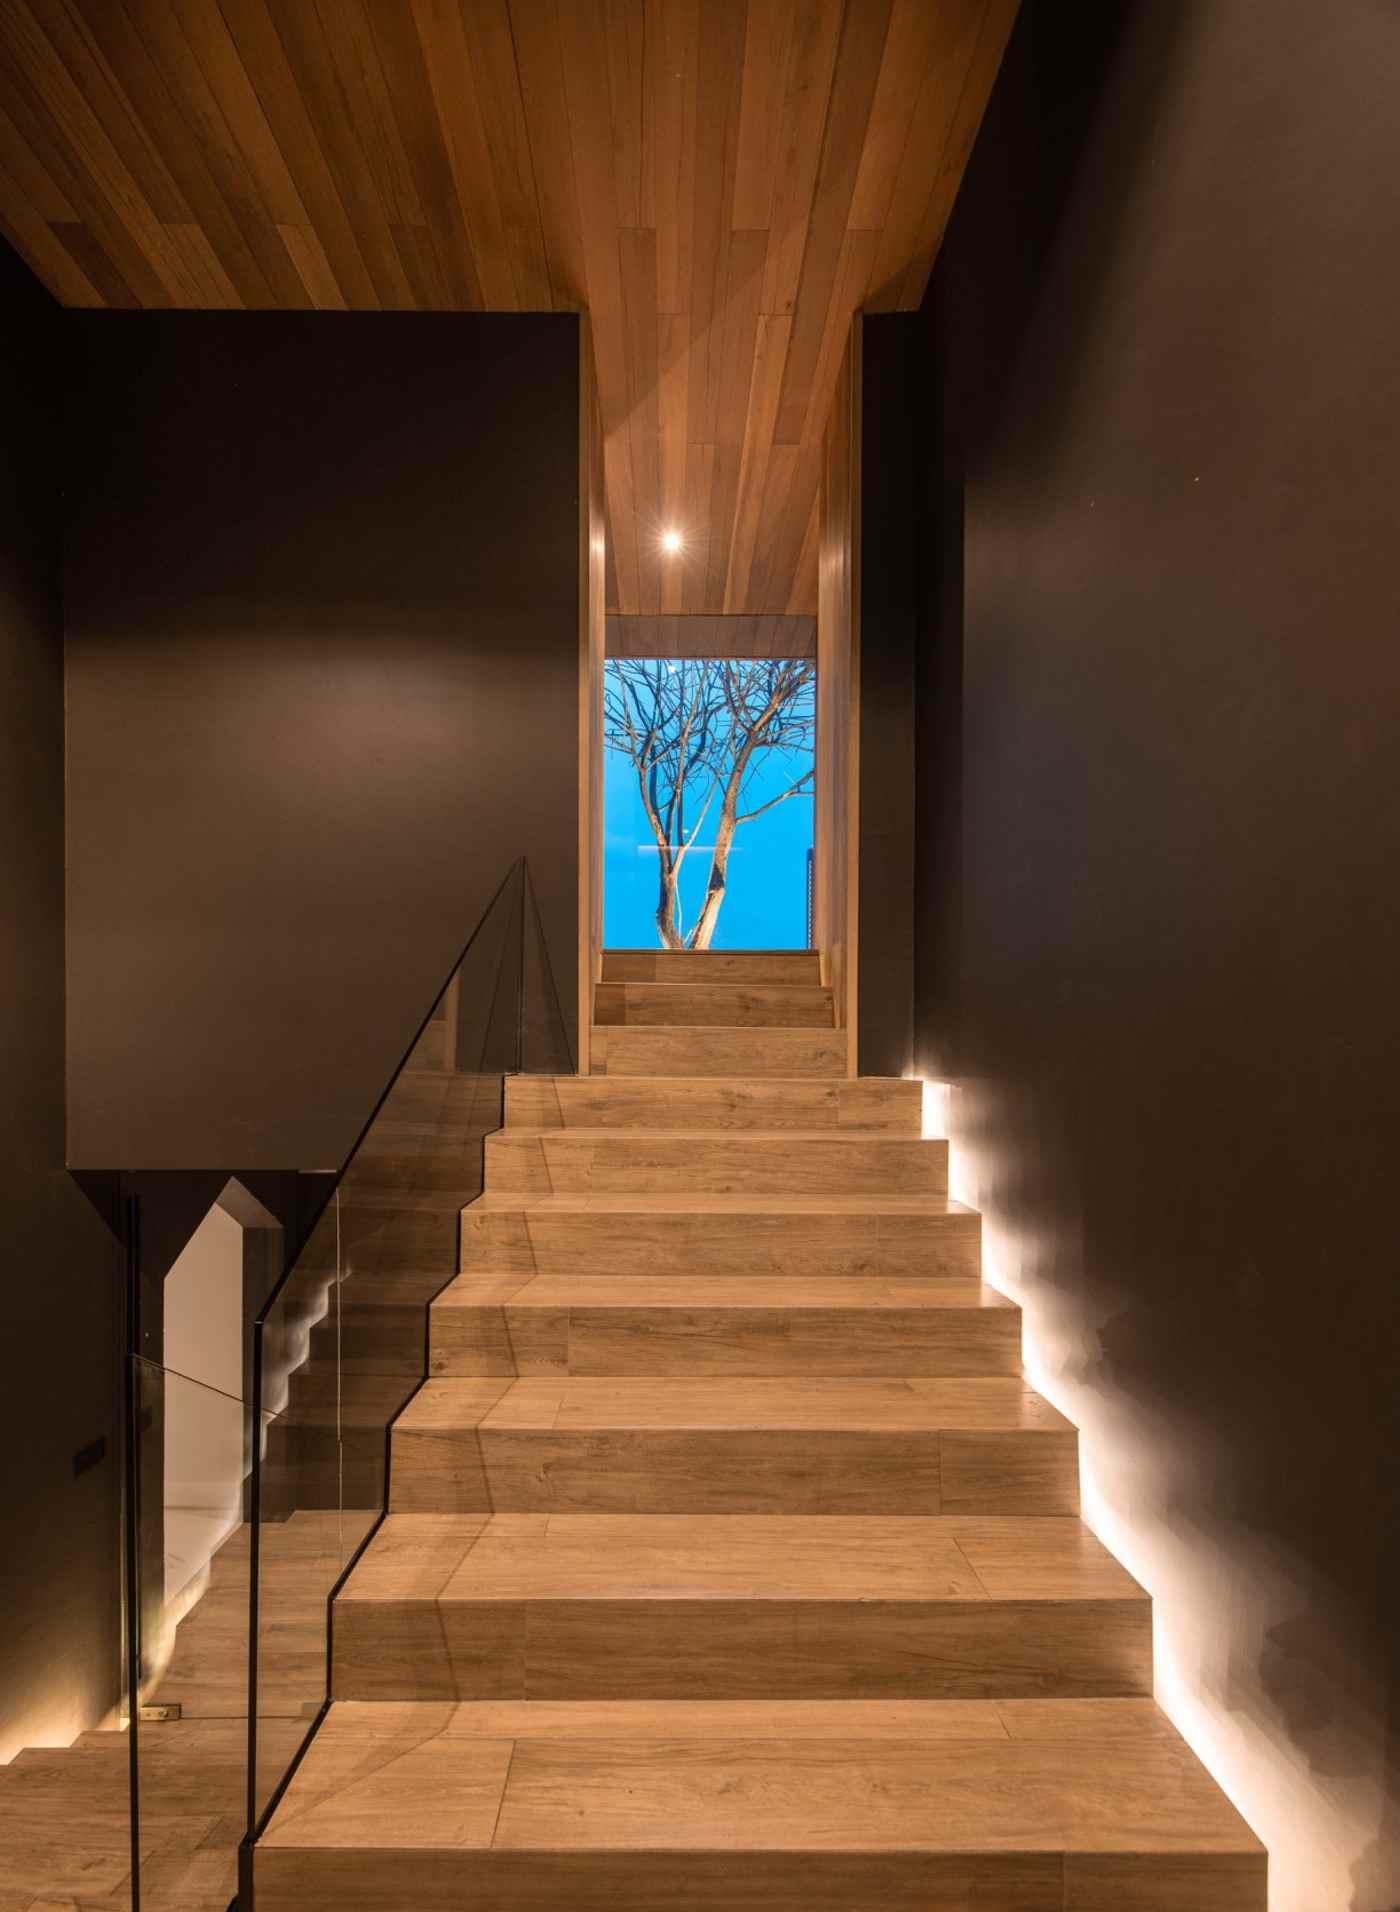 Illuminated wooden stairs leading up with glass fall protection